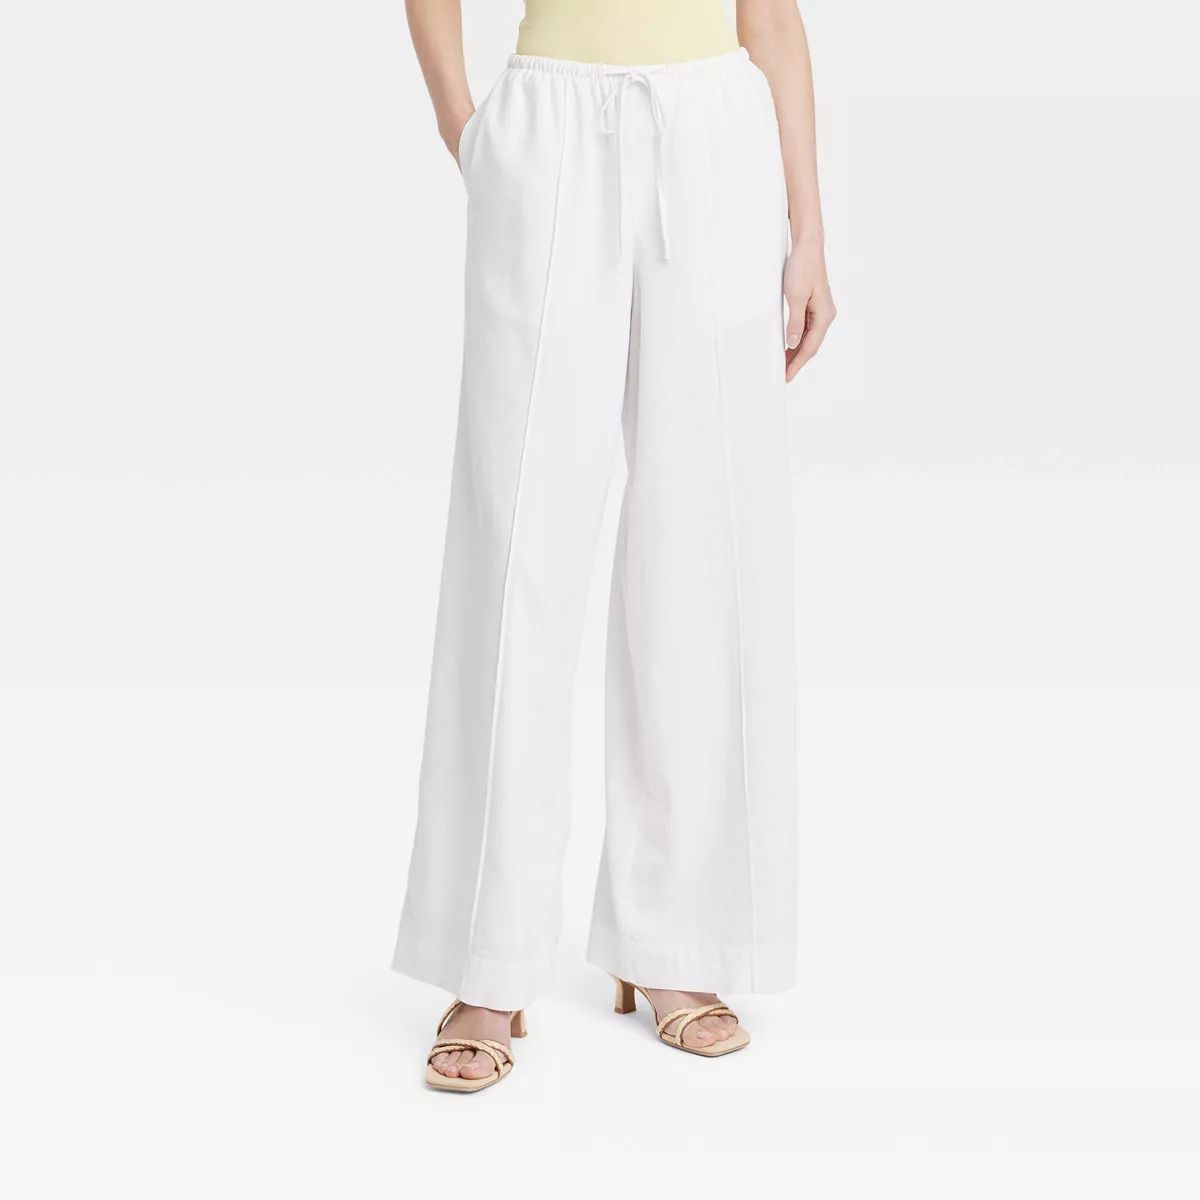 Women's High-Rise Wide Leg Linen Pull-On Pants - A New Day™ Tan XS | Target